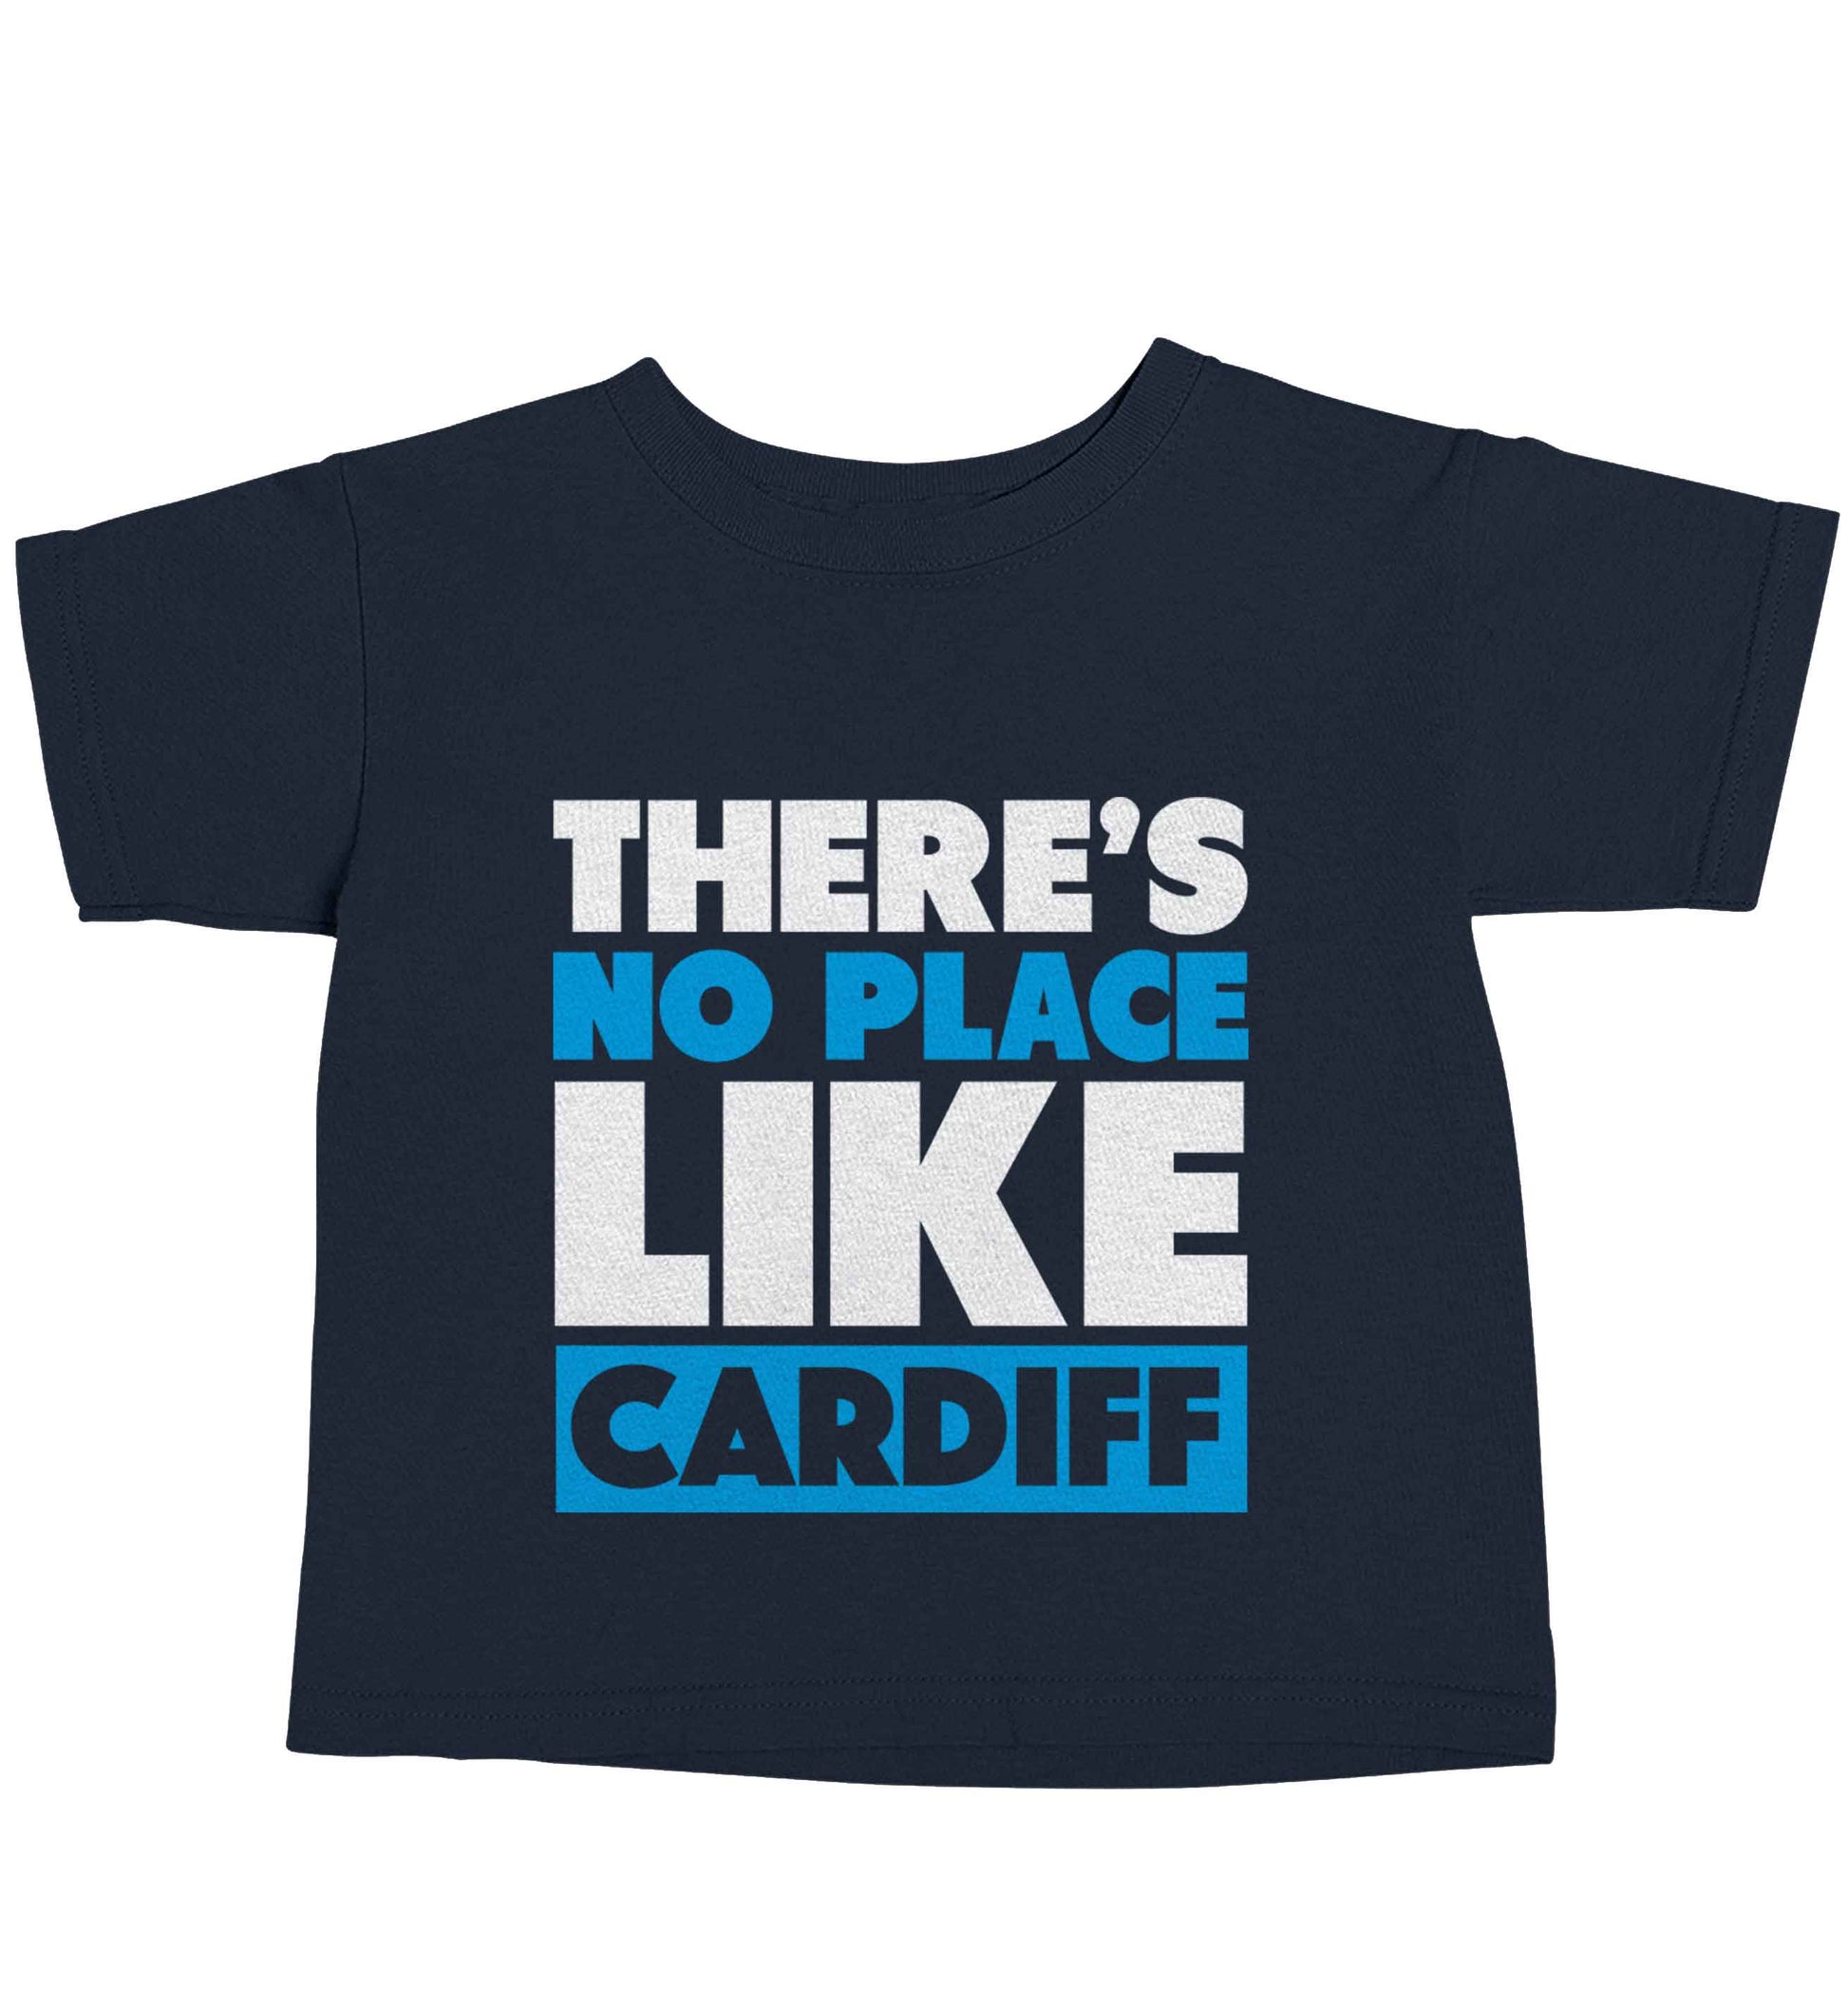 There's no place like Cardiff navy baby toddler Tshirt 2 Years